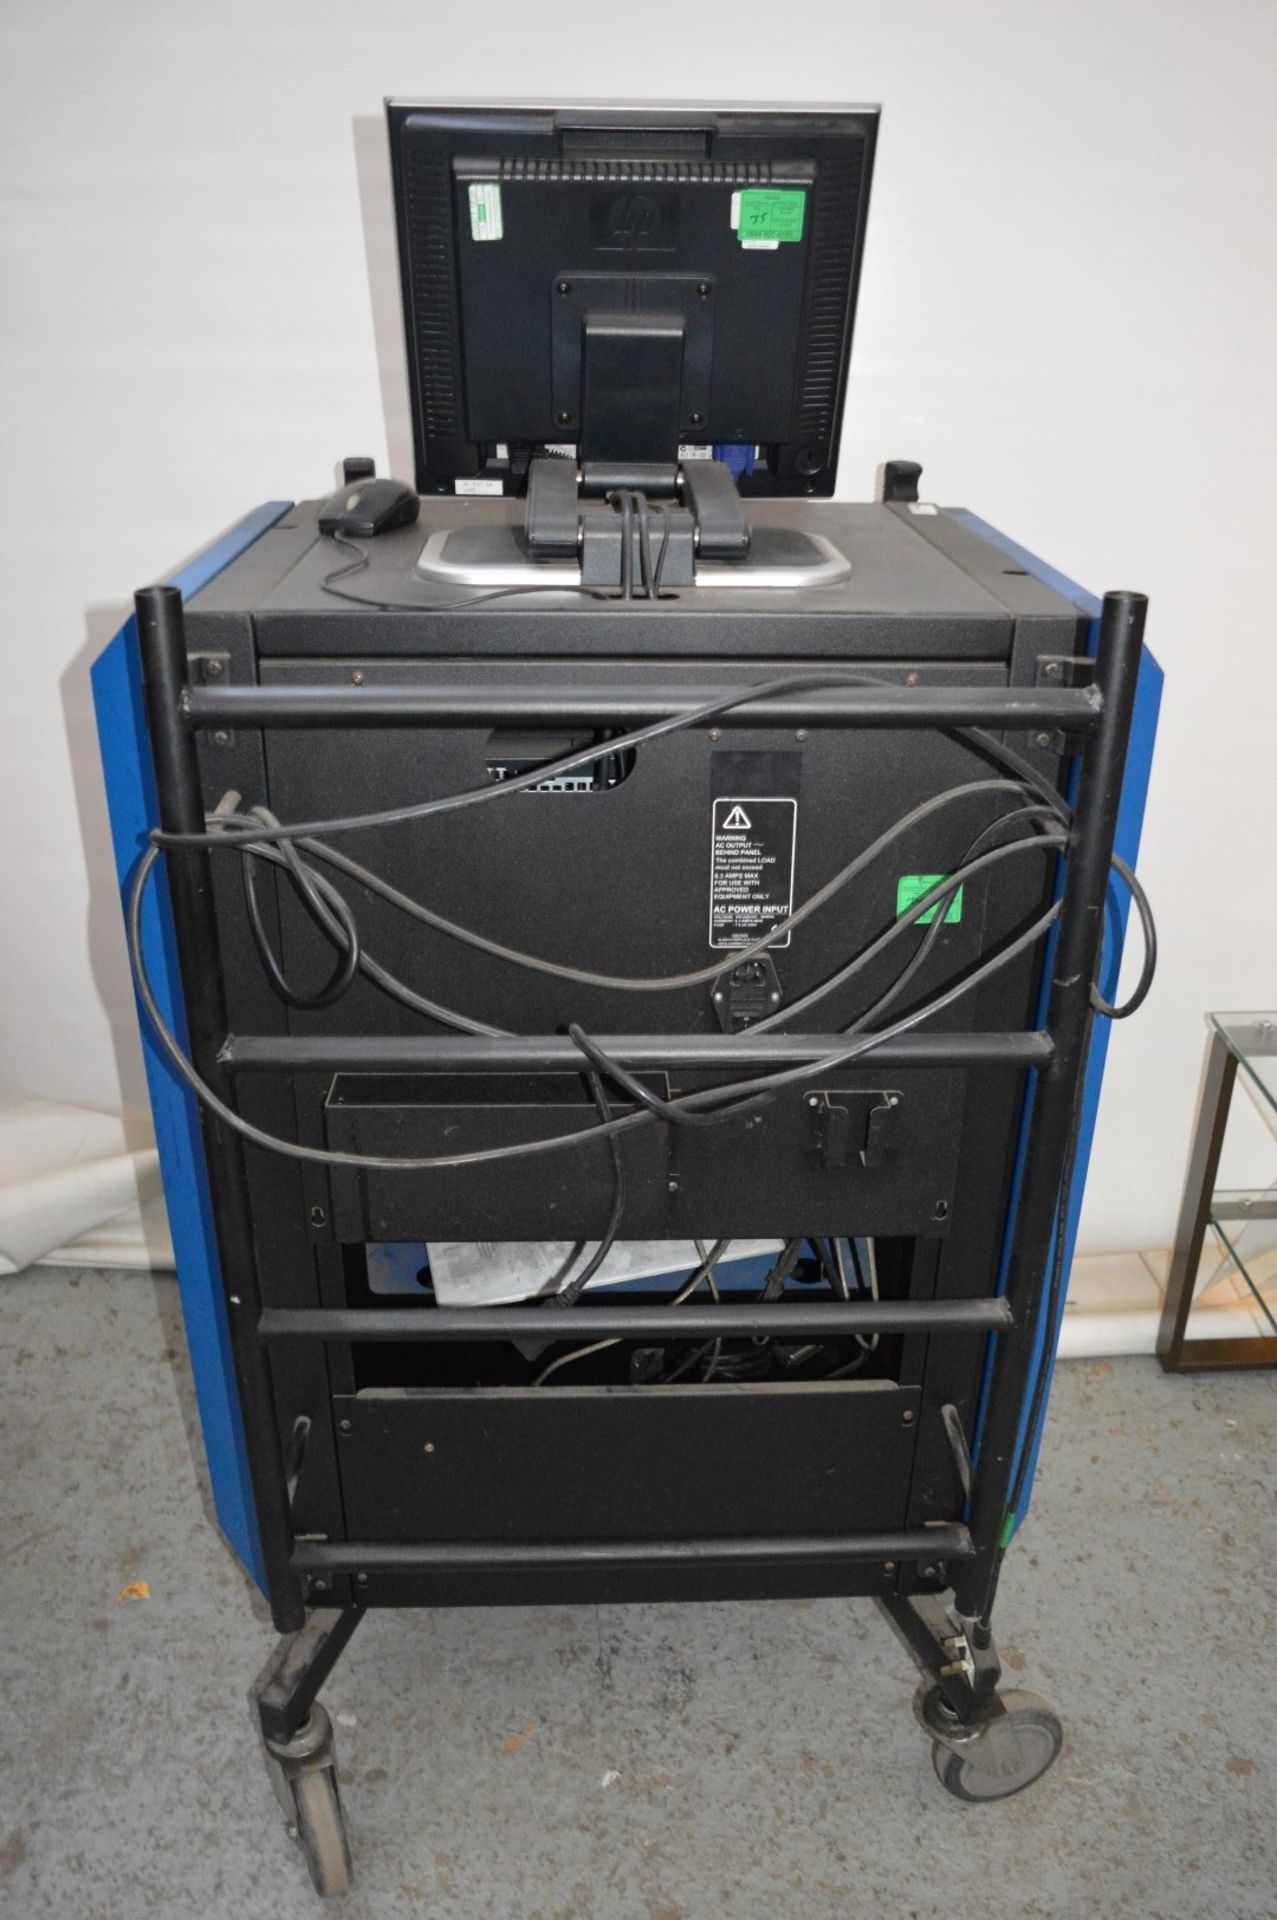 1 x Omitec OmiTechCenter Automotive Diagnostic Workstation - Please View The Pictures Provided - - Image 20 of 21